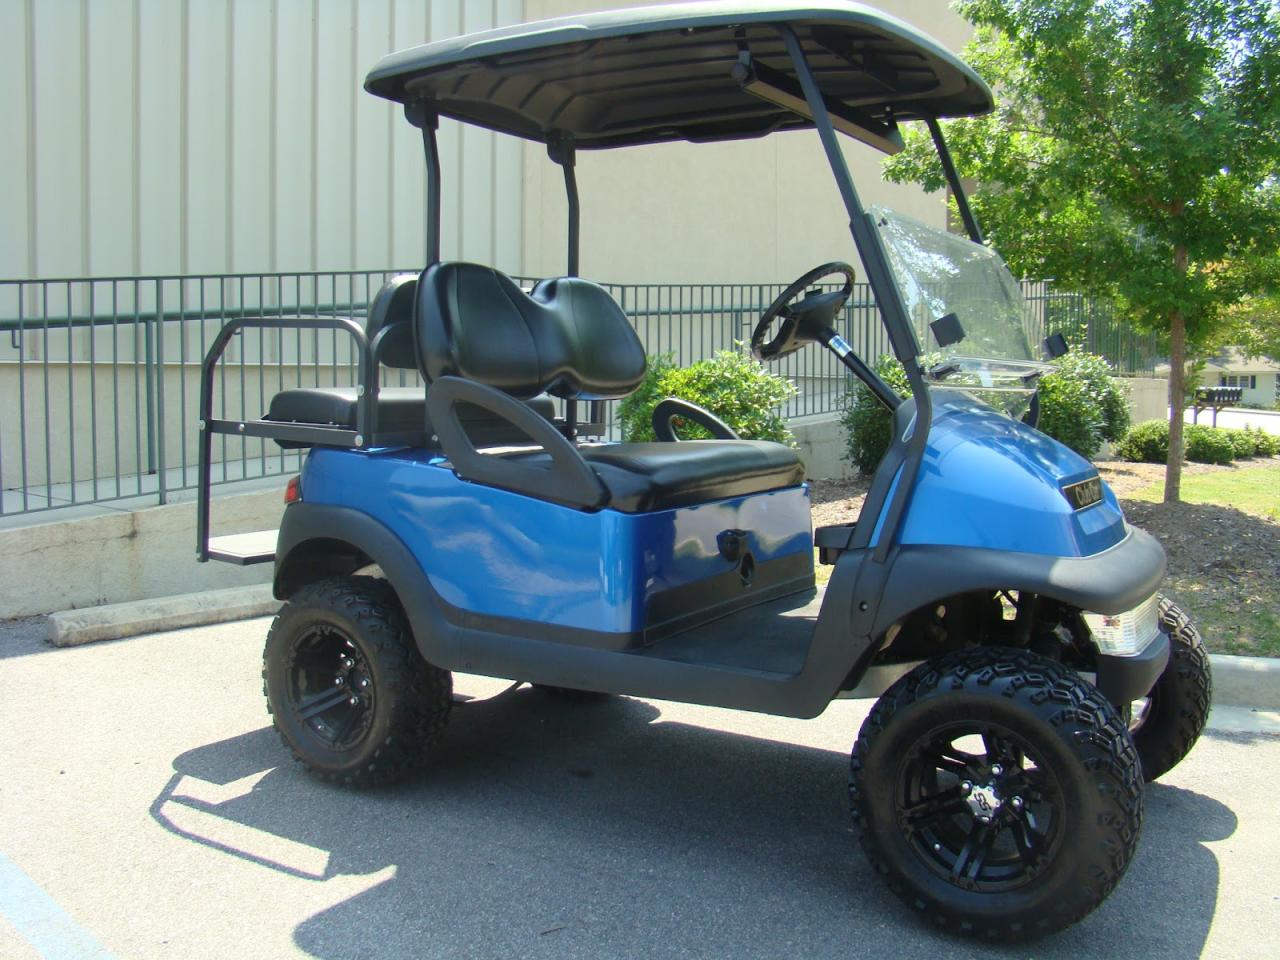 Used Golf Carts for Sale by Owner in Ritchie, West Virginia: Find Your Perfect Ride Today!